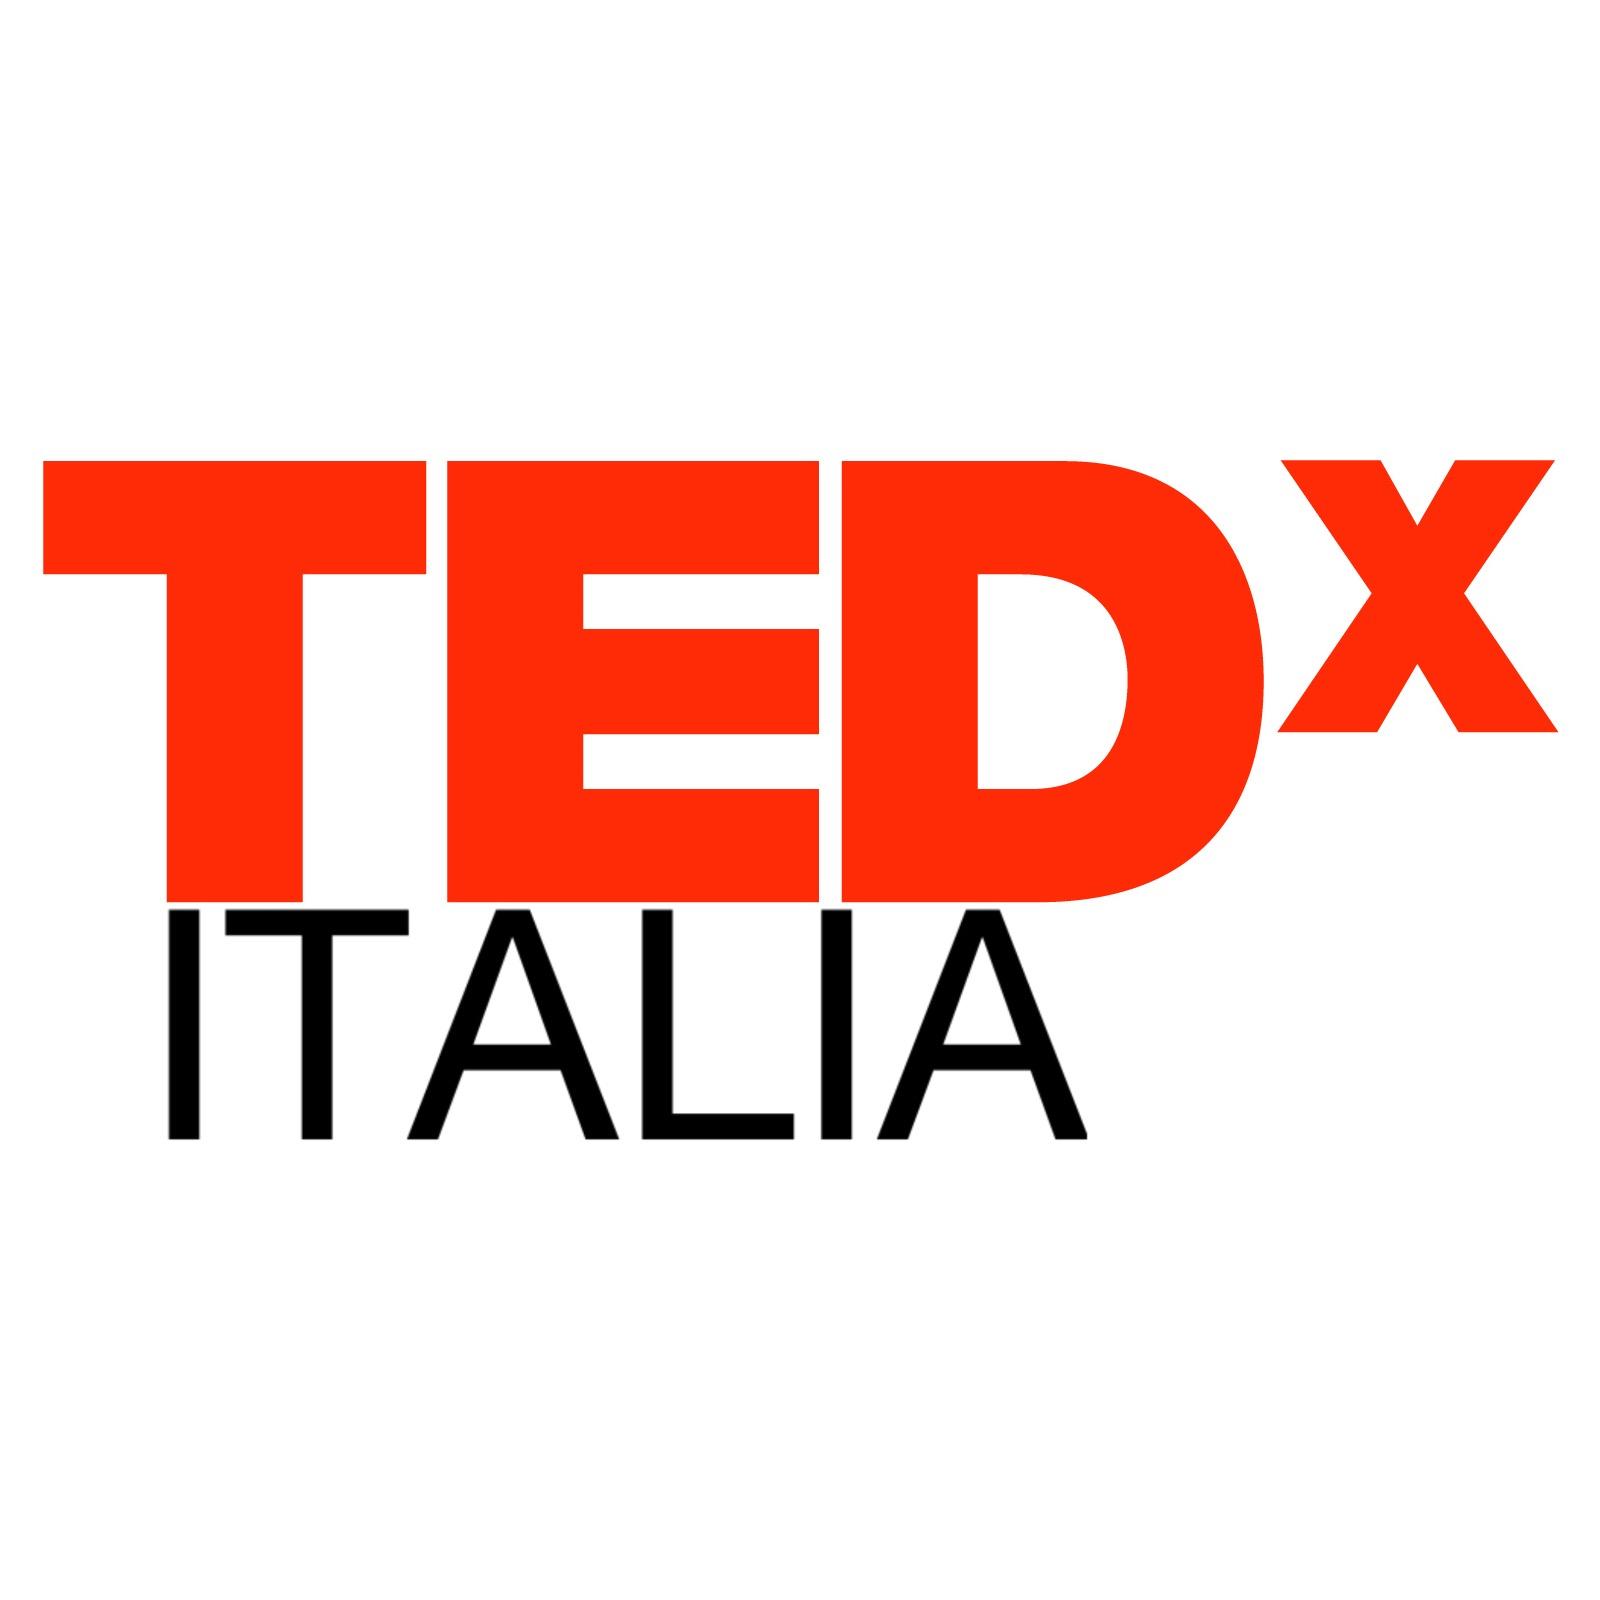 News e RT about TEDx in Italy - Notizie e RT sui TEDx in Italia